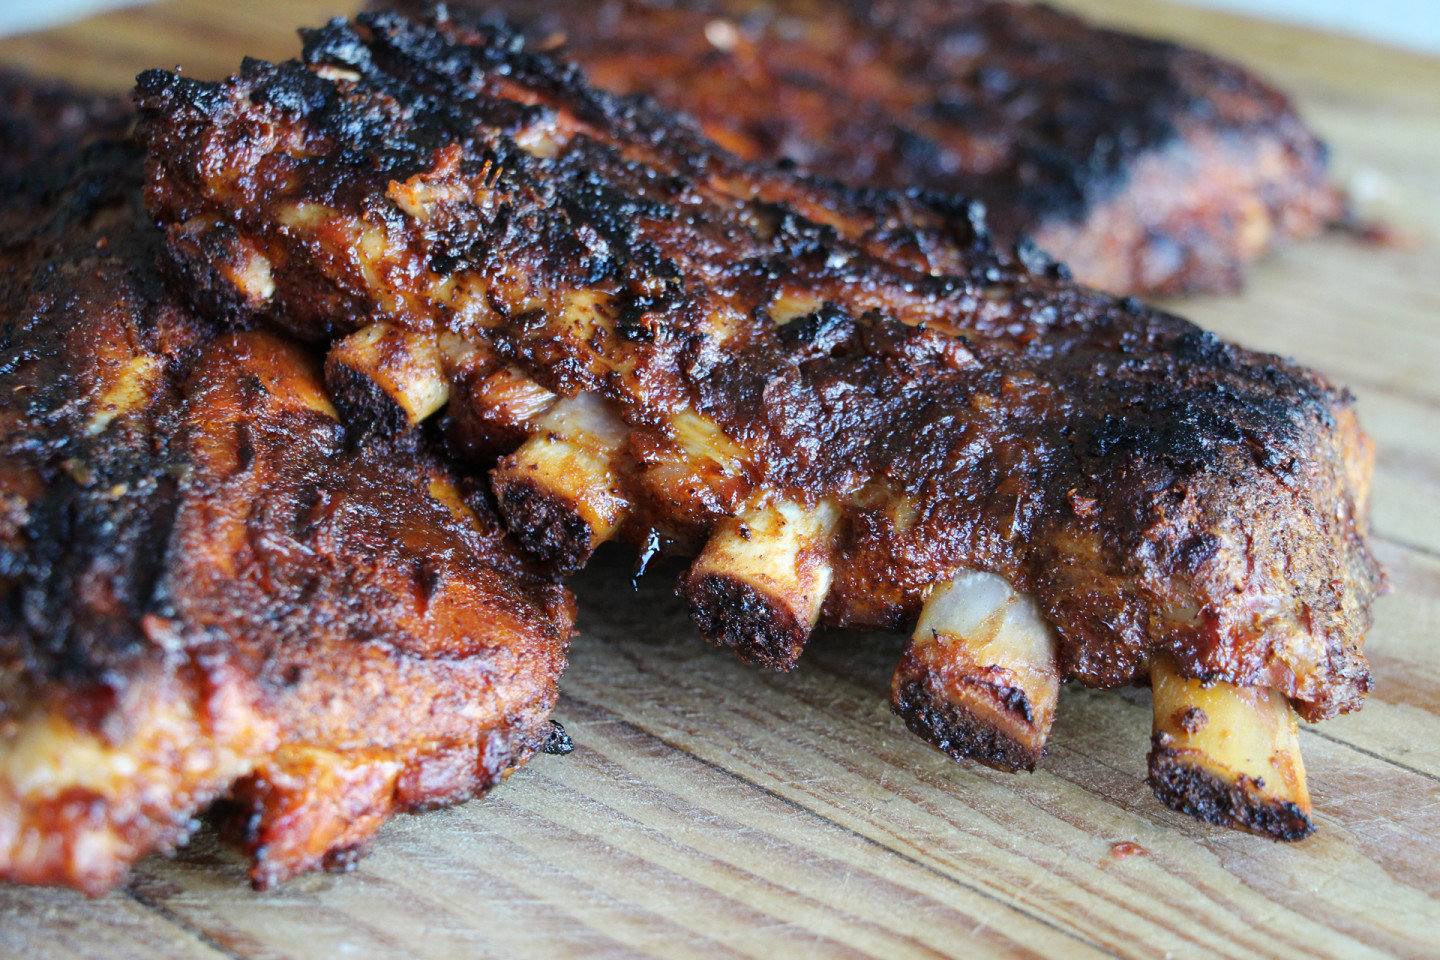 Fall-Off-The-Bone BBQ Baby Back Ribs with Homemade Barbecue Sauce | Our